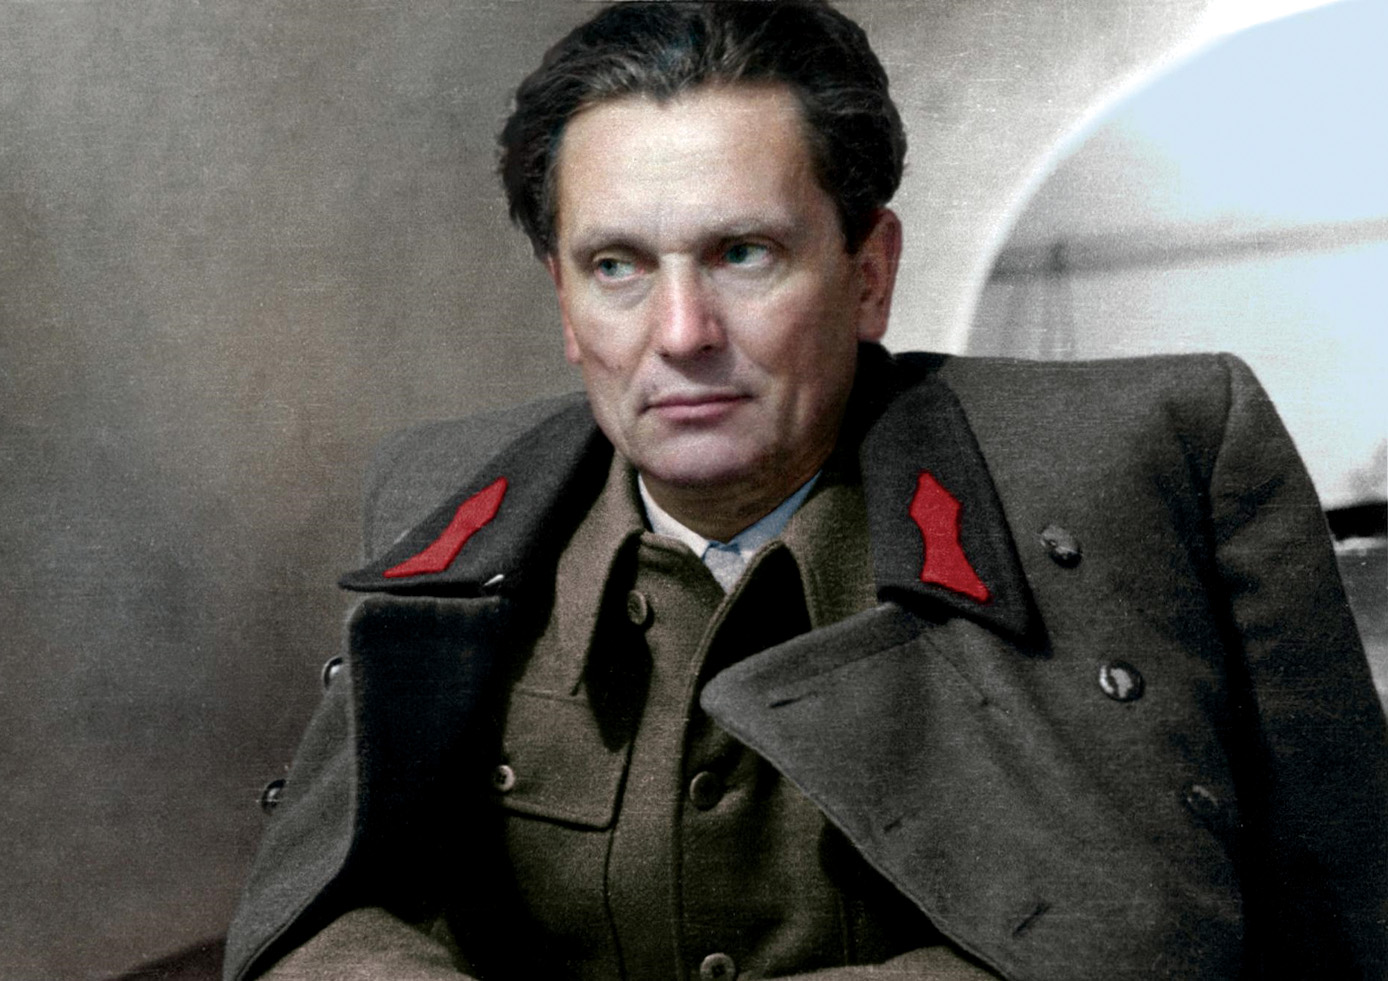 Josip Broz ‘Tito’ led the communist partisan resistance to the Nazis in Yugoslavia during World War II. However, Tito was a pragmatist and attacked the rival Chetniks as well in an effort to maintain control of the country after the end of World War II.